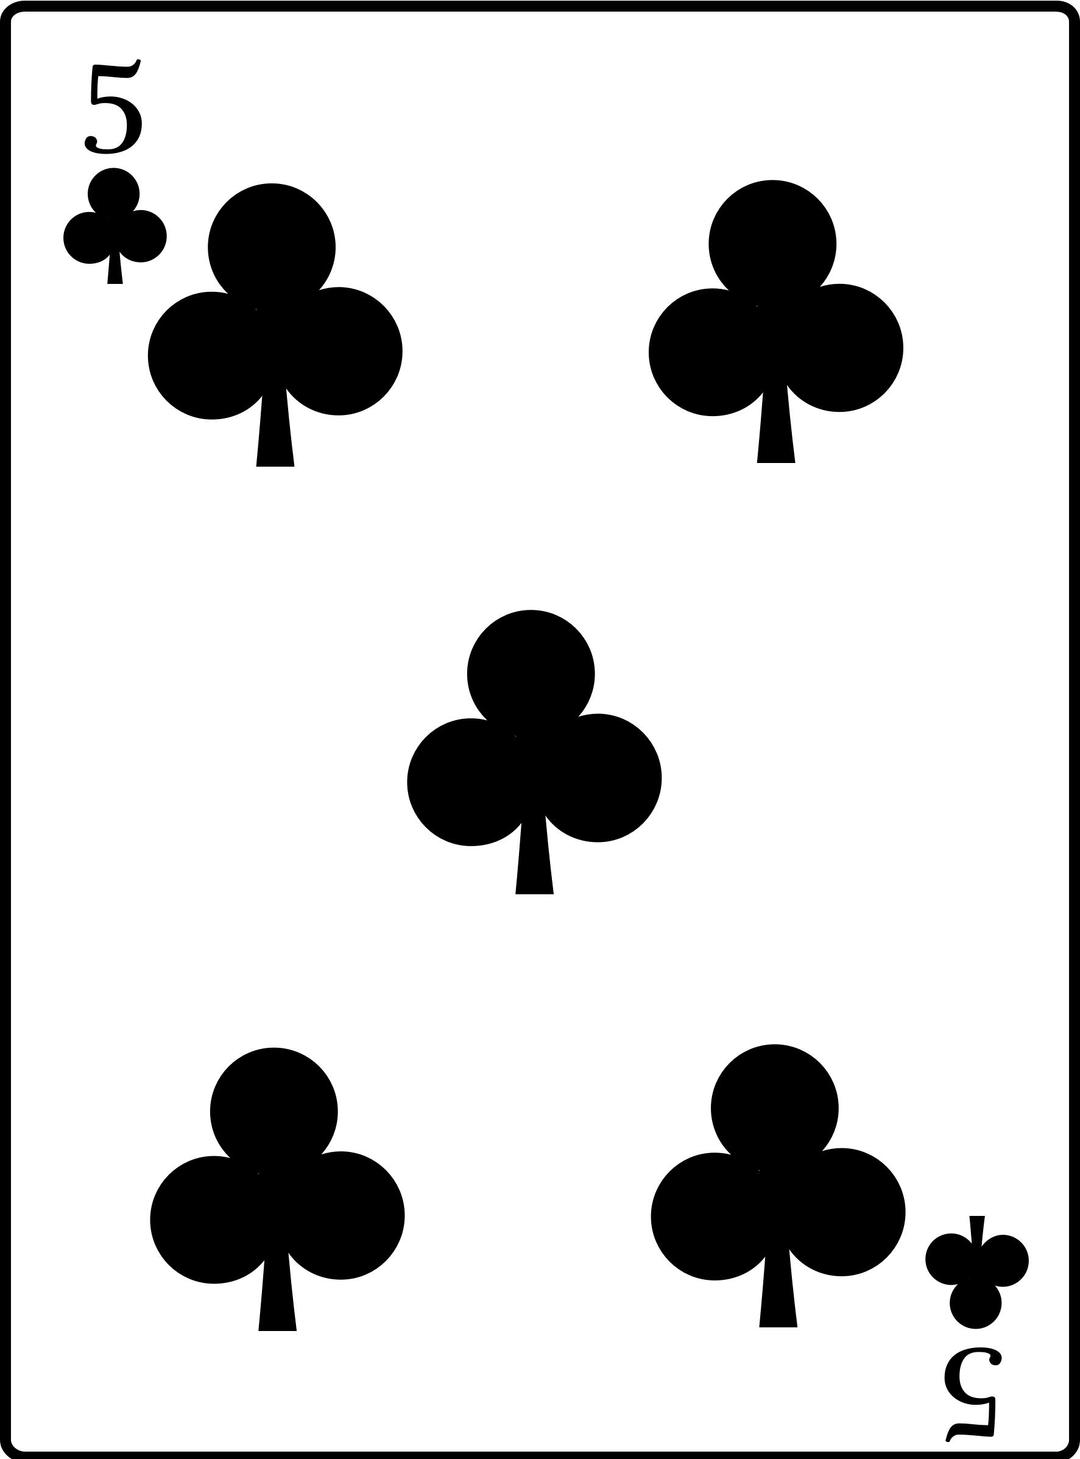 5 of Clubs png transparent